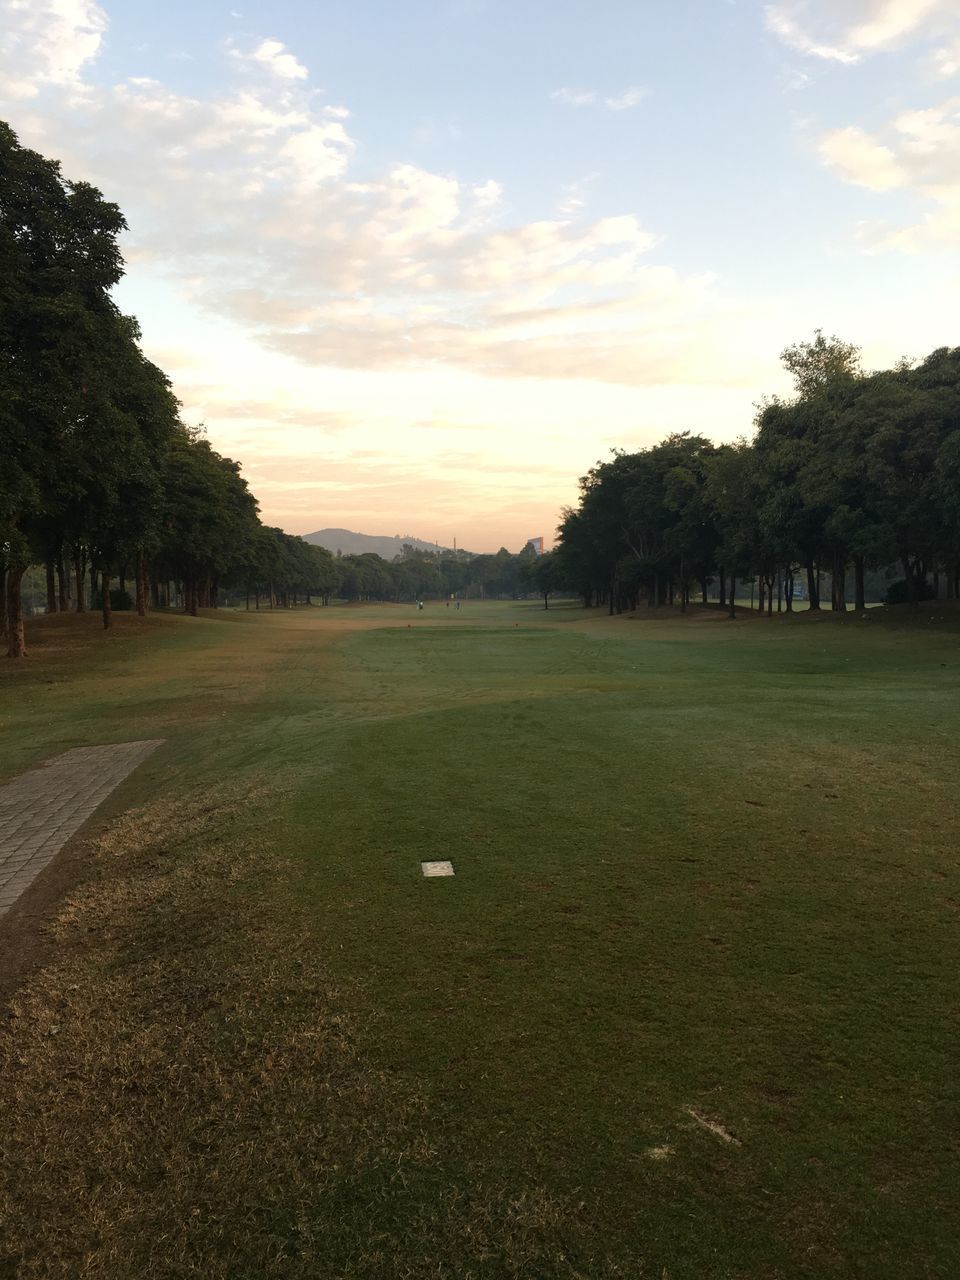 SCENIC VIEW OF GOLF COURSE AGAINST SKY DURING SUNSET